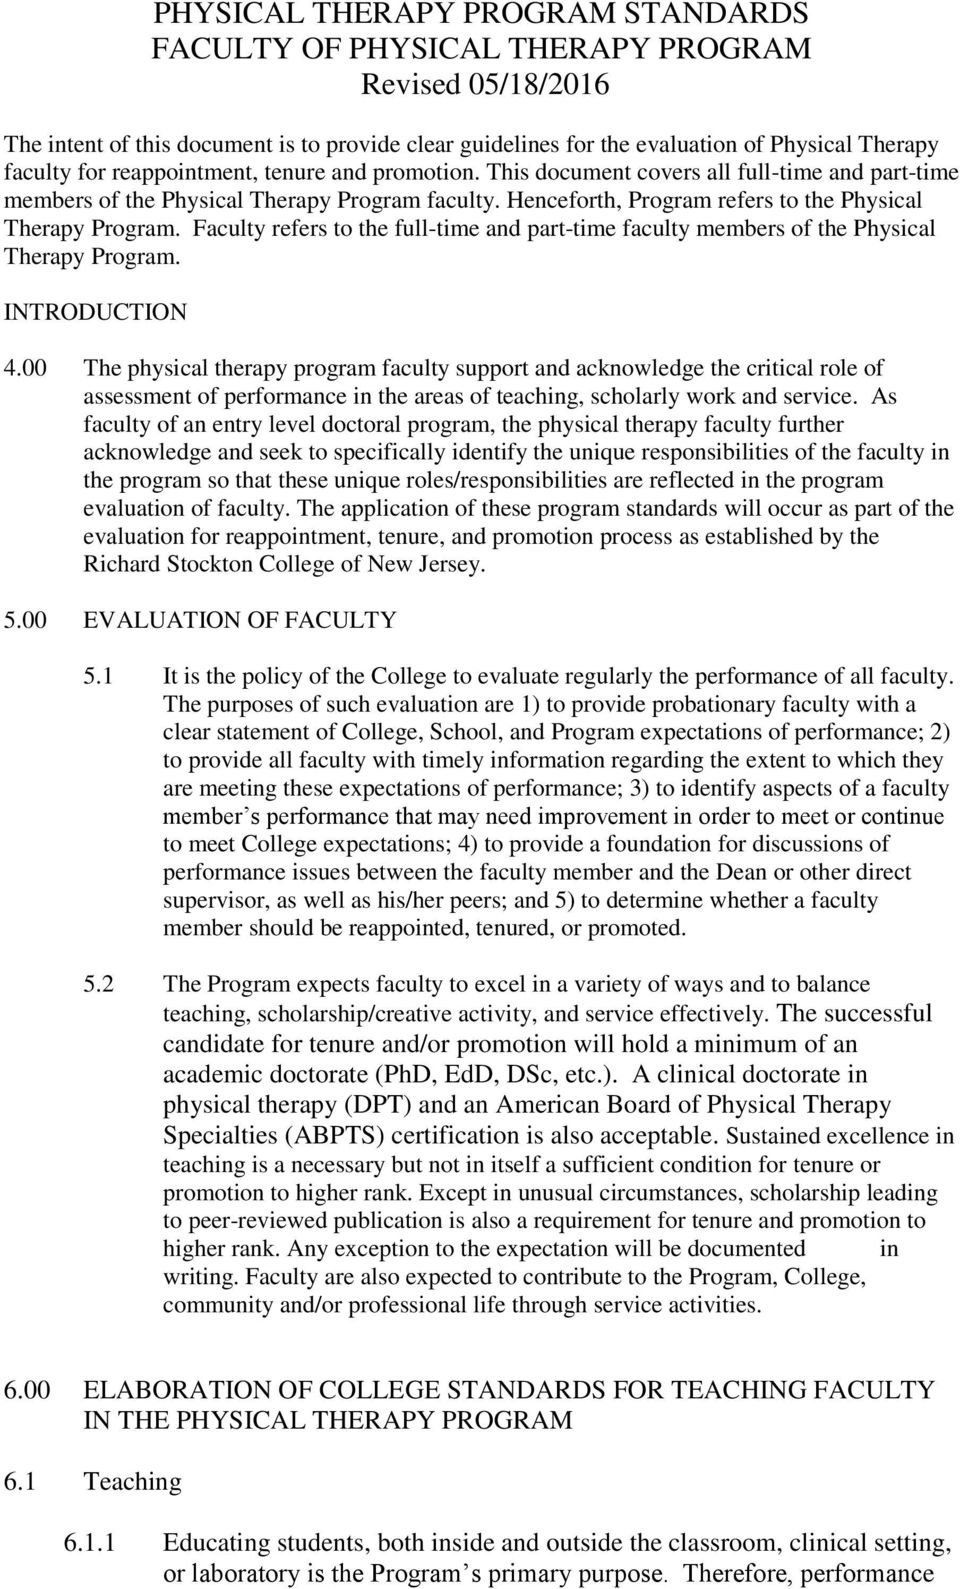 Faculty refers to the full-time and part-time faculty members of the Physical Therapy Program. INTRODUCTION 4.